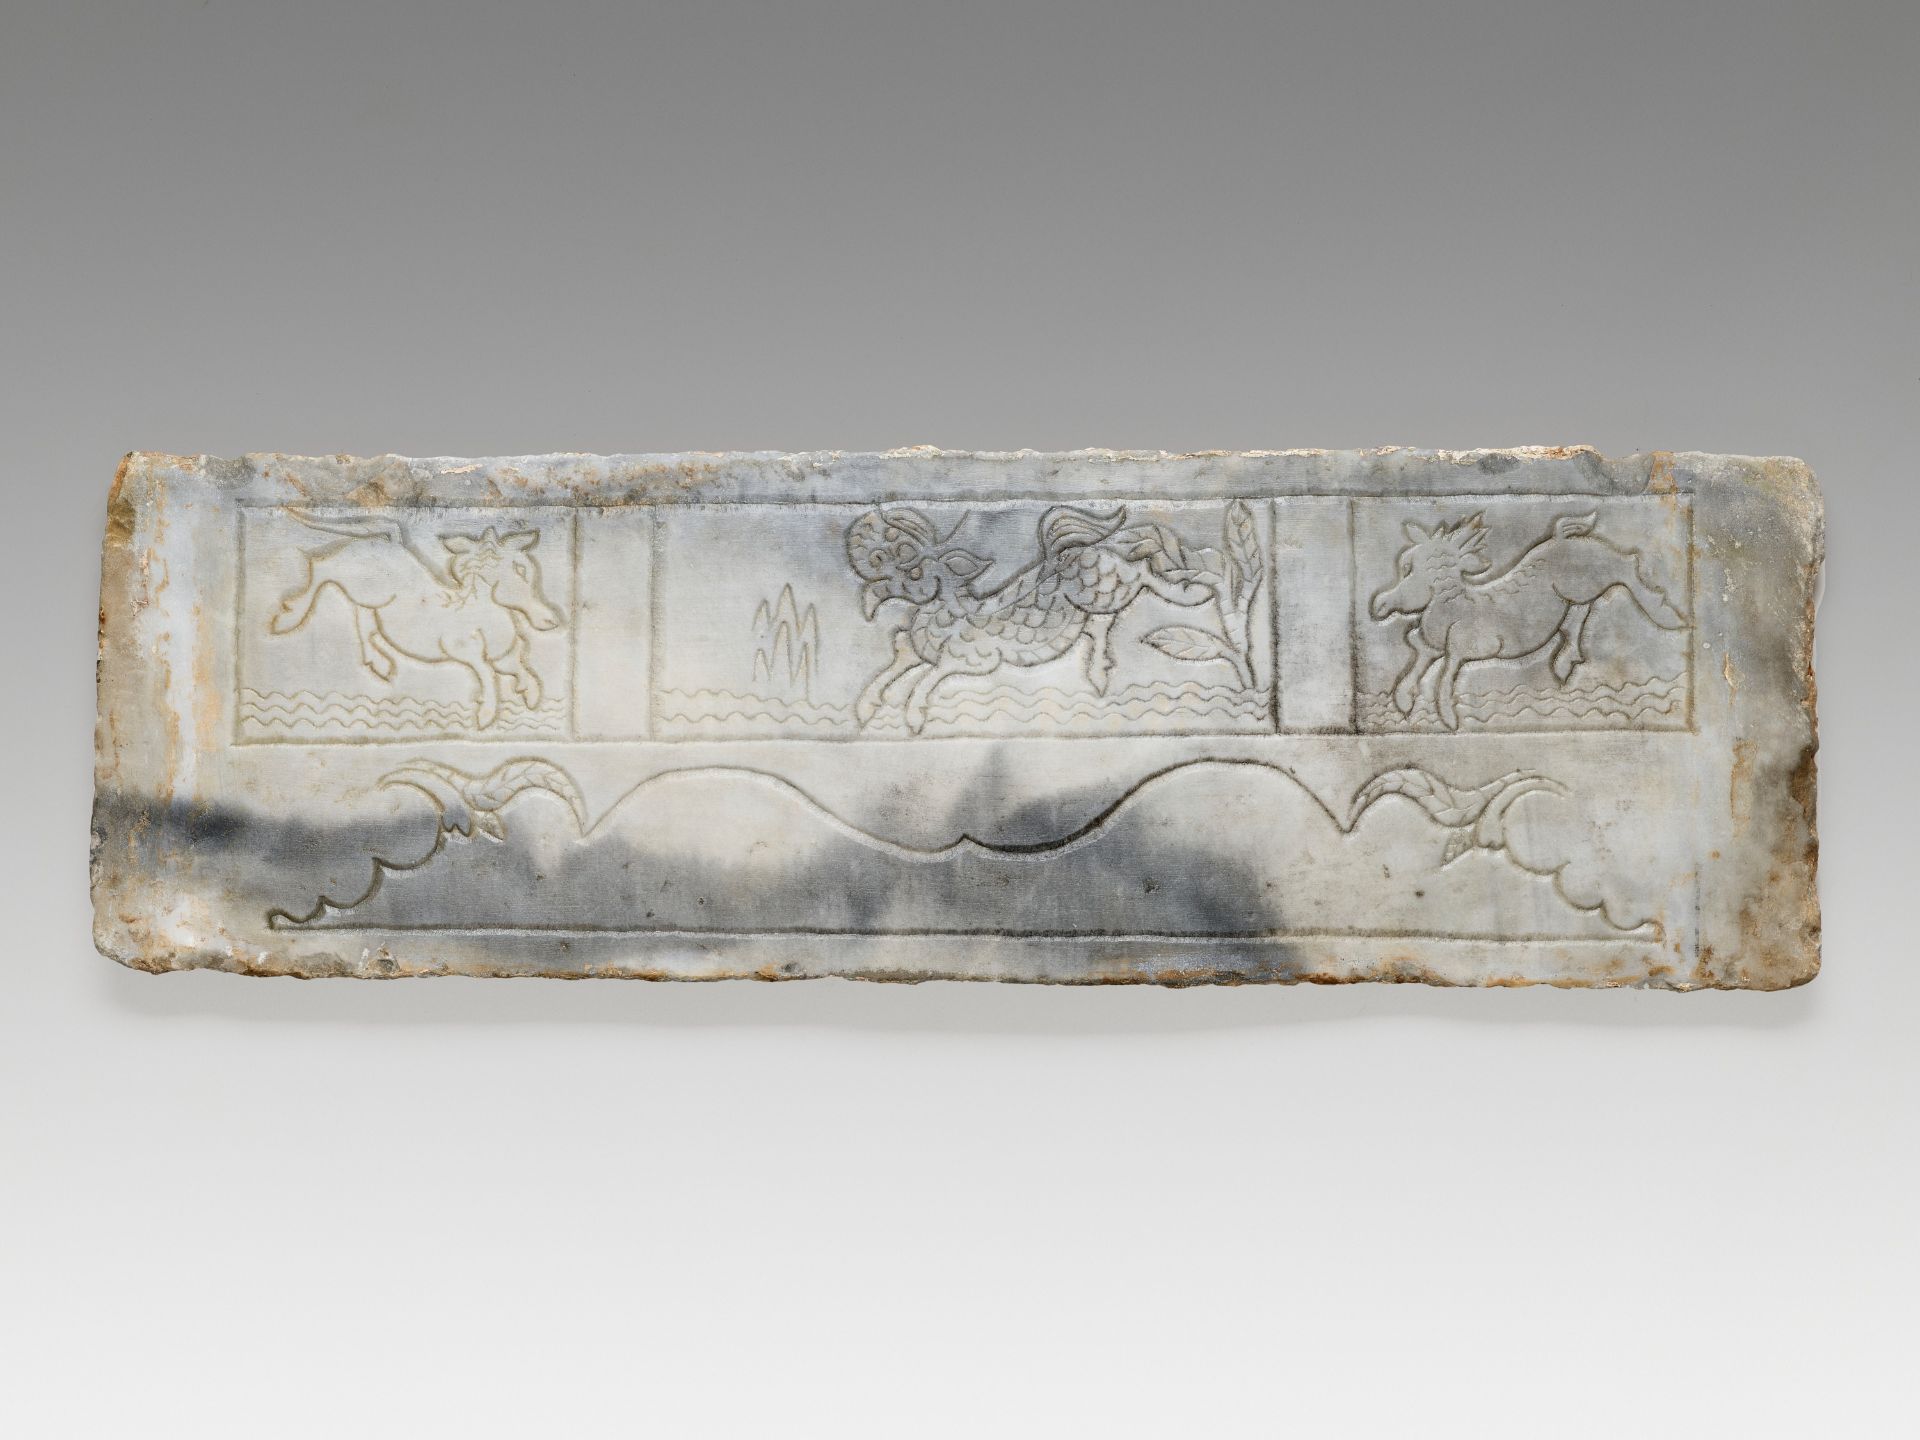 TWO 'MYTHICAL BEAST' MARBLE PANELS, FRAGMENTS OF A FUNERARY STRUCTURE, TANG TO JIN DYNASTY - Image 5 of 9